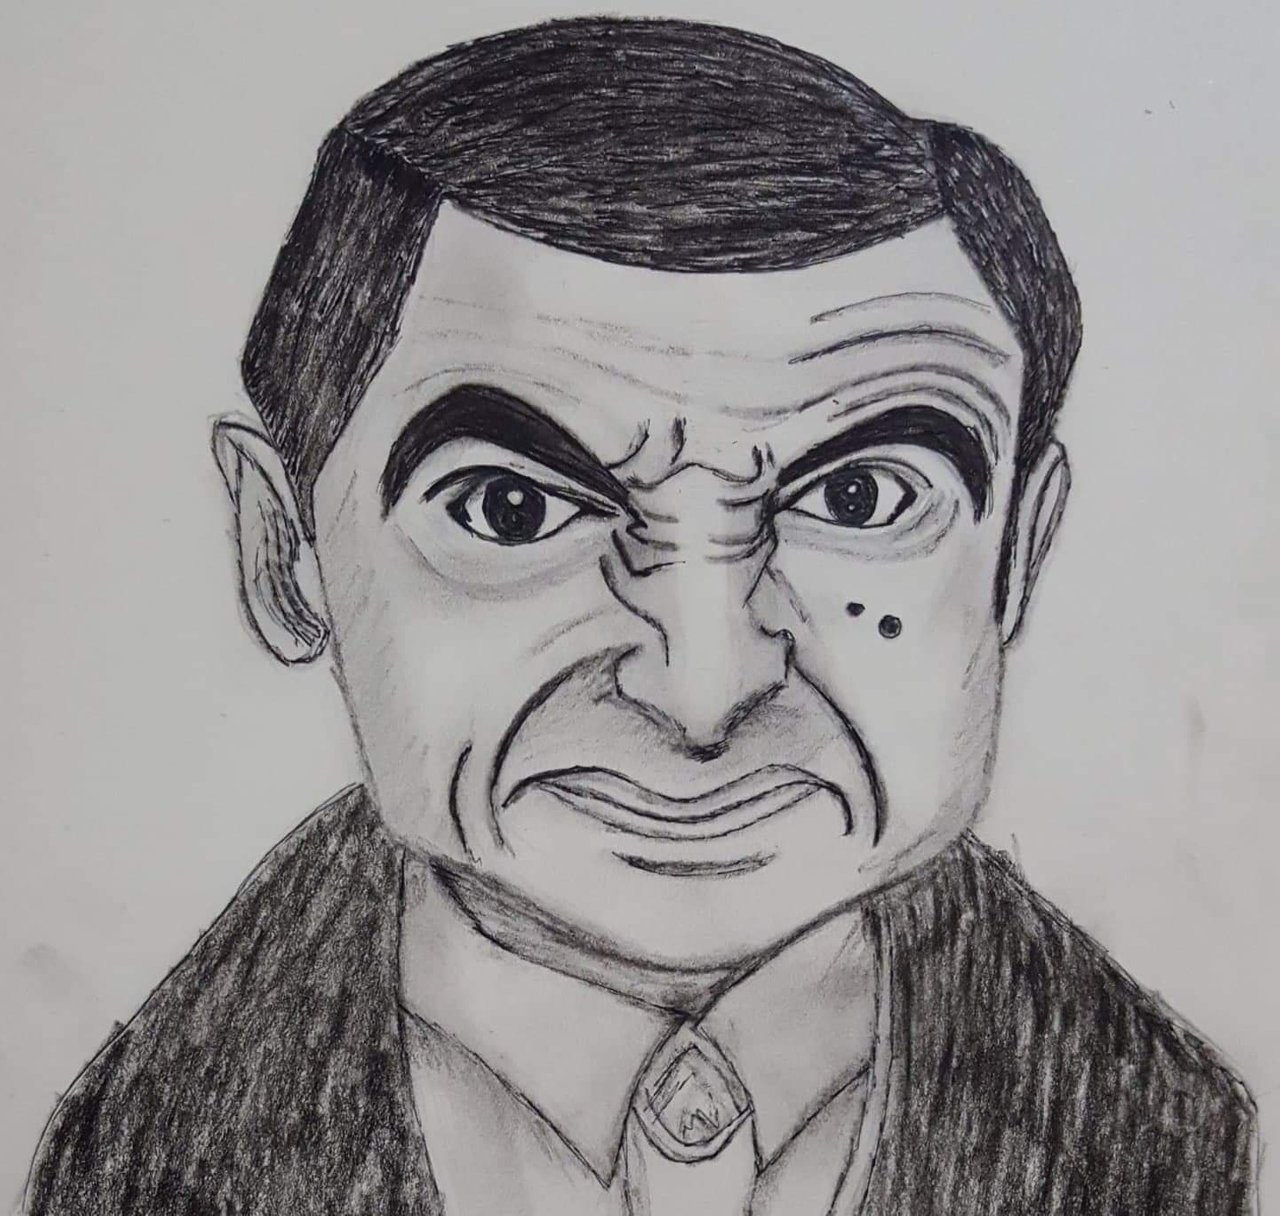 Hand sketch drawing of famous comedy character Mr. Bean | PeakD